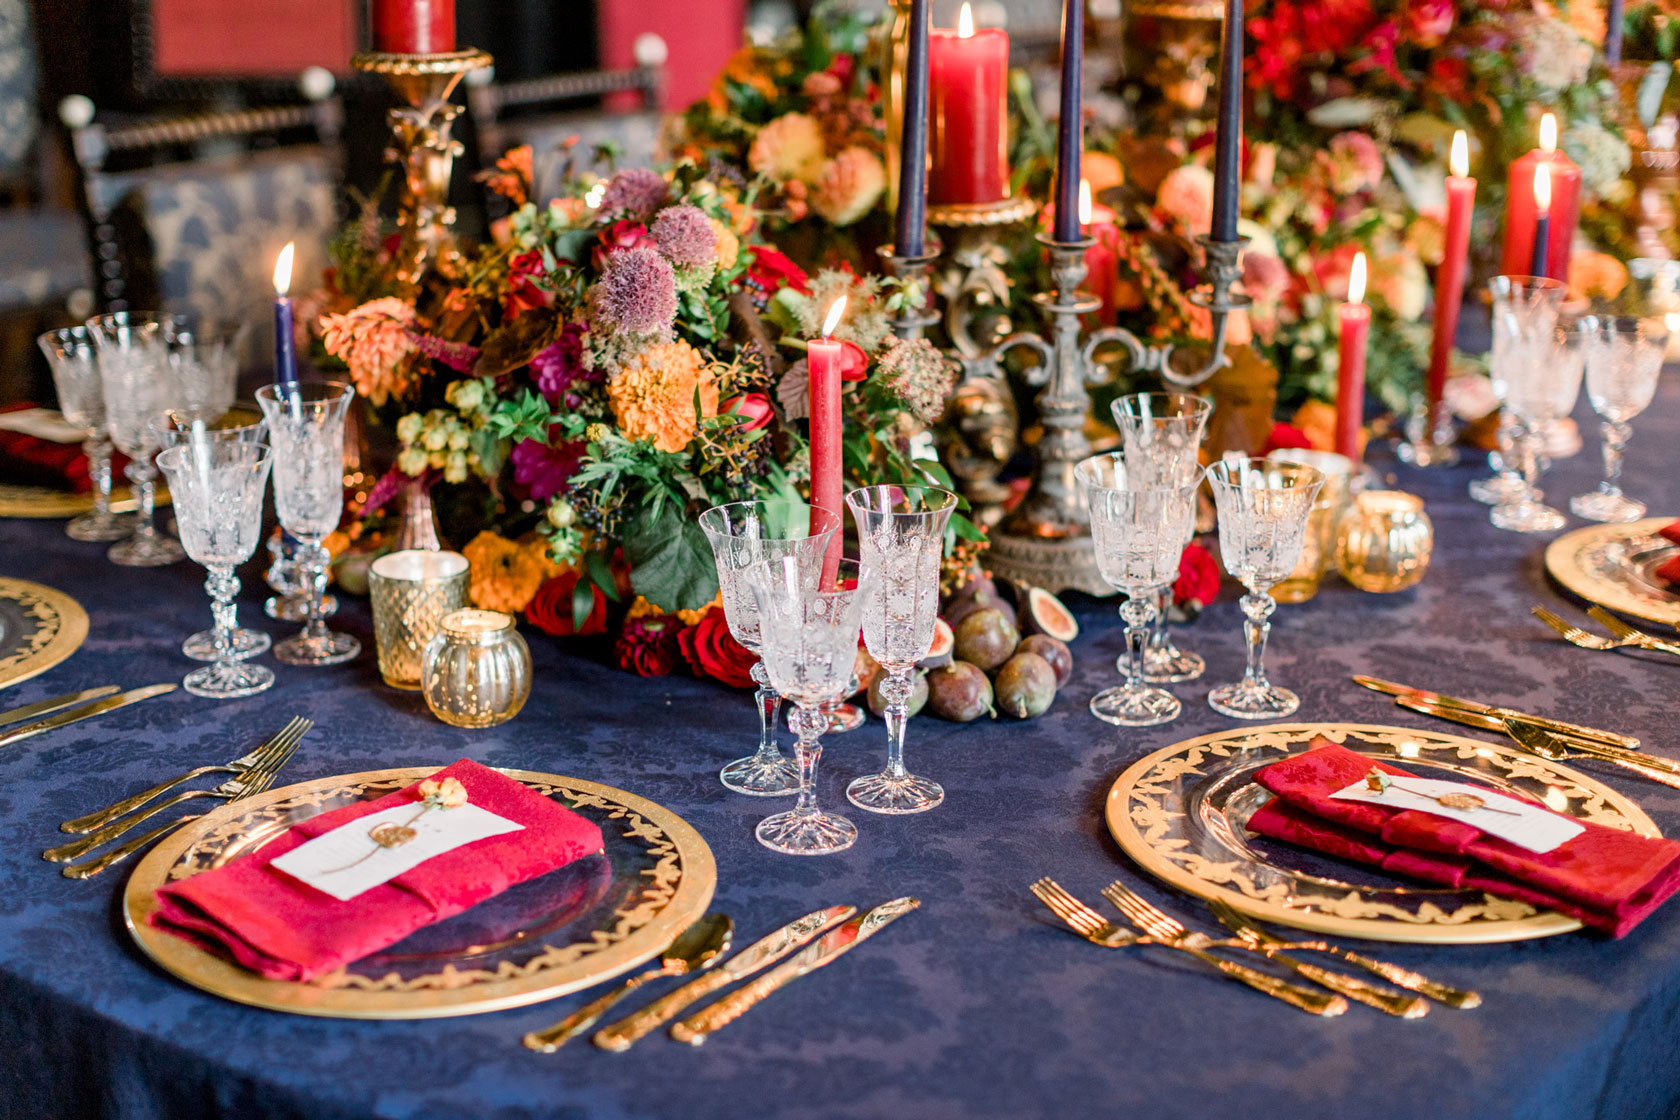 navy linen, gold charger plates and cutlery, red napkins and delicate crystal glasses